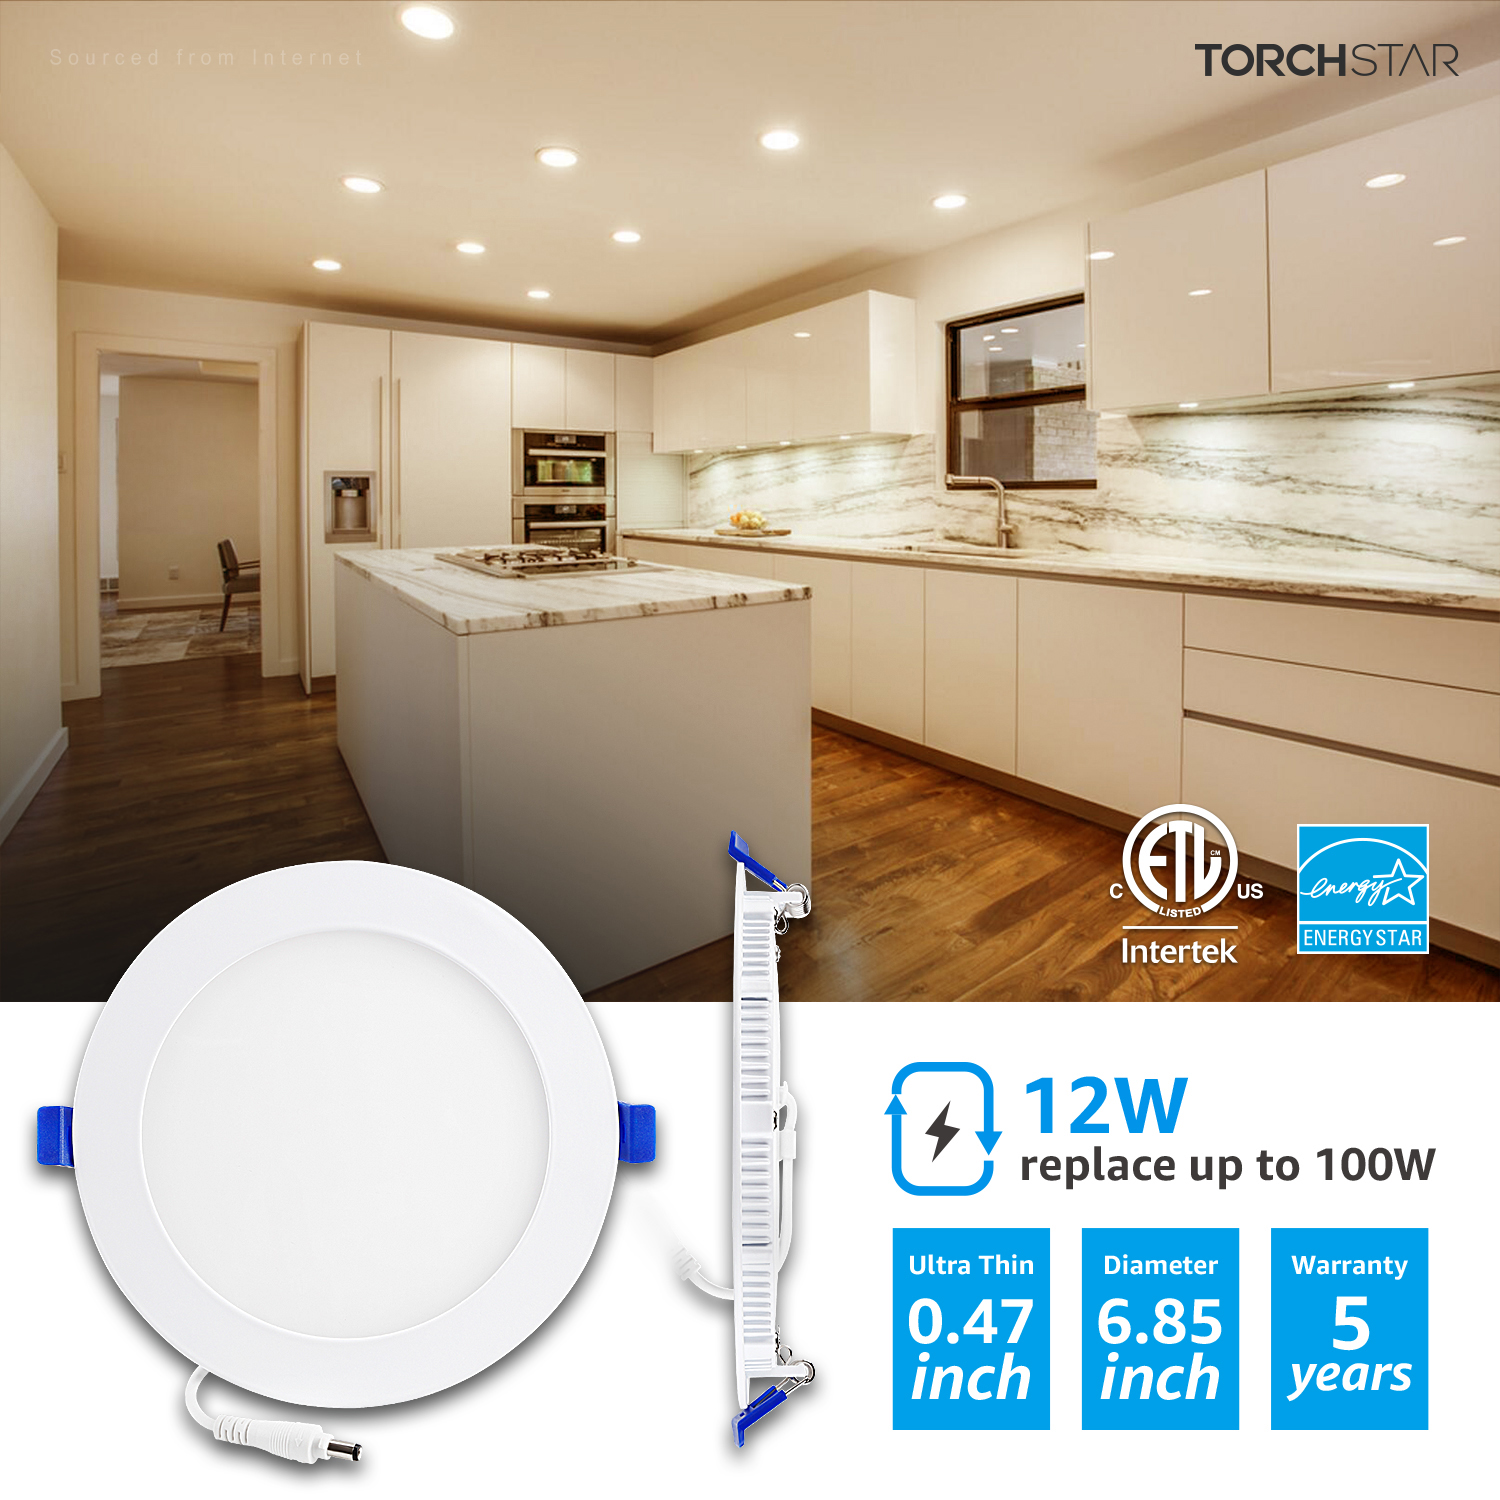 TORCHSTAR 4-Pack Inch Slim LED Recessed Downlight with J-box, Dimmable  Ultra-Thin Canless Light, ETL  Energy Star Listed, 3000K Warm White,  3-year Warranty